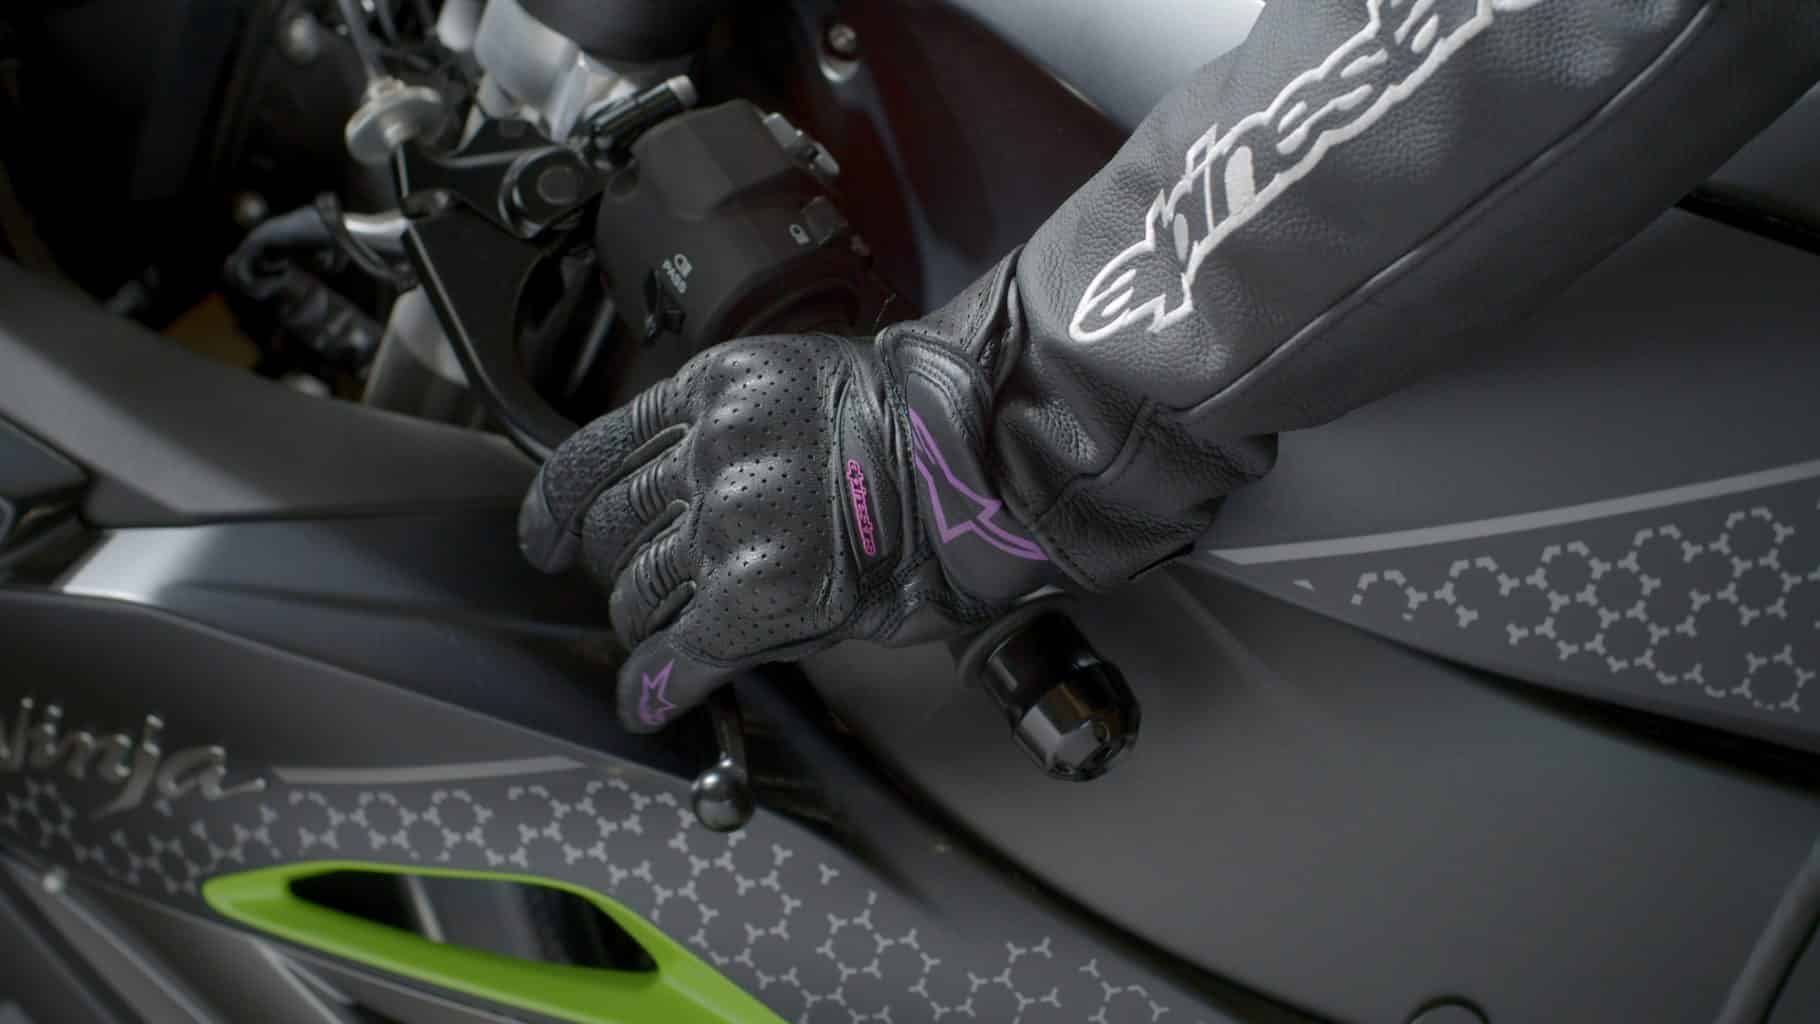 Best Heated Motorcycle Gloves - Complete Buyer's Guide